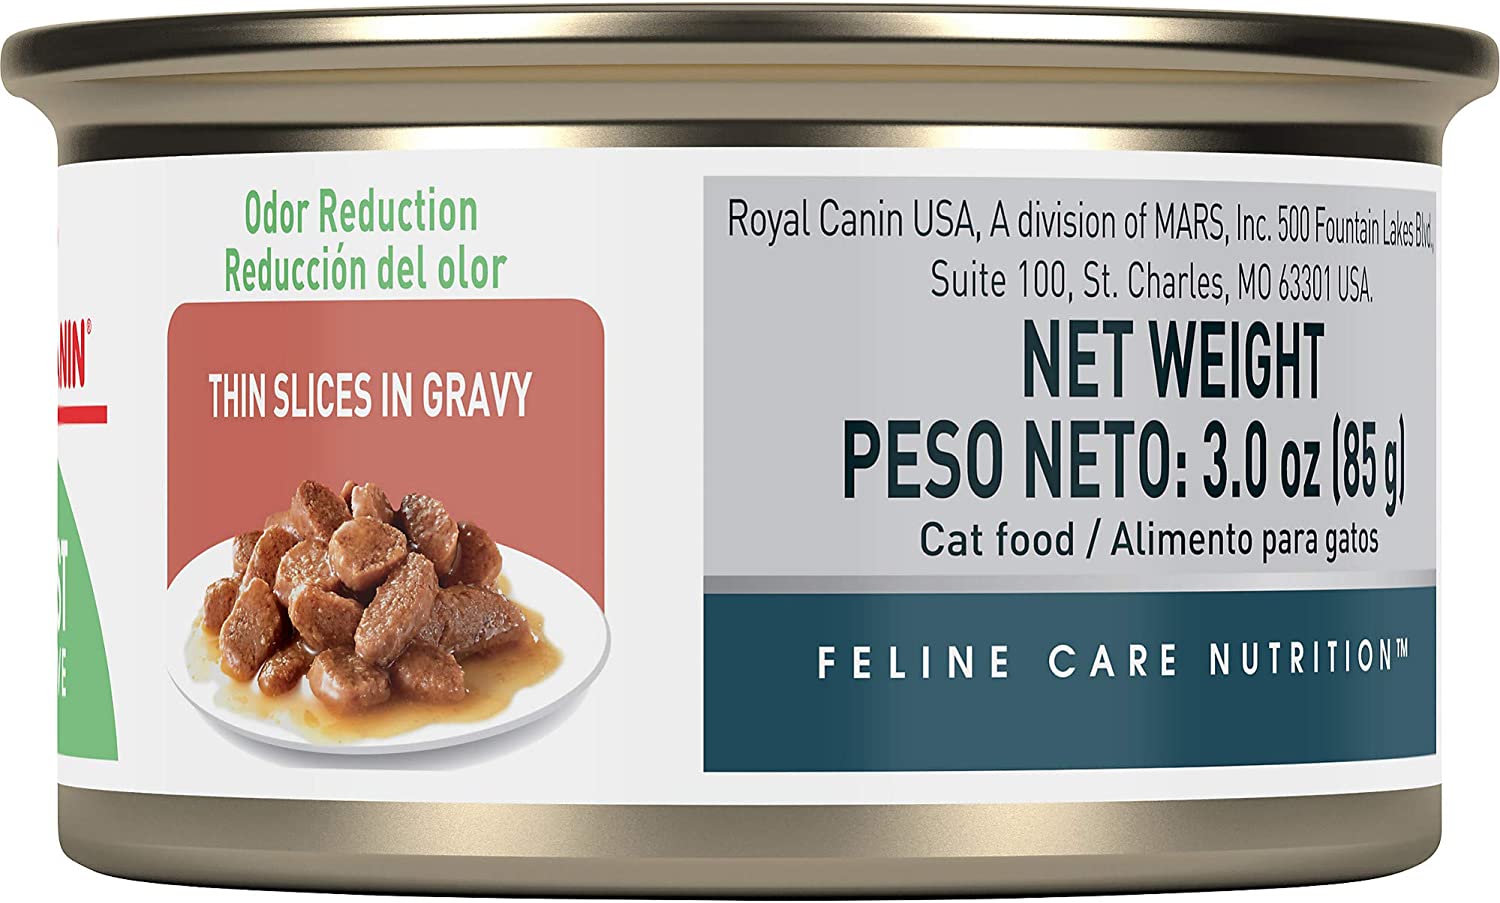 Royal Canin Feline Care Nutrition Digest Sensitive Thin Slices In Gravy Canned Cat Food, 3 oz